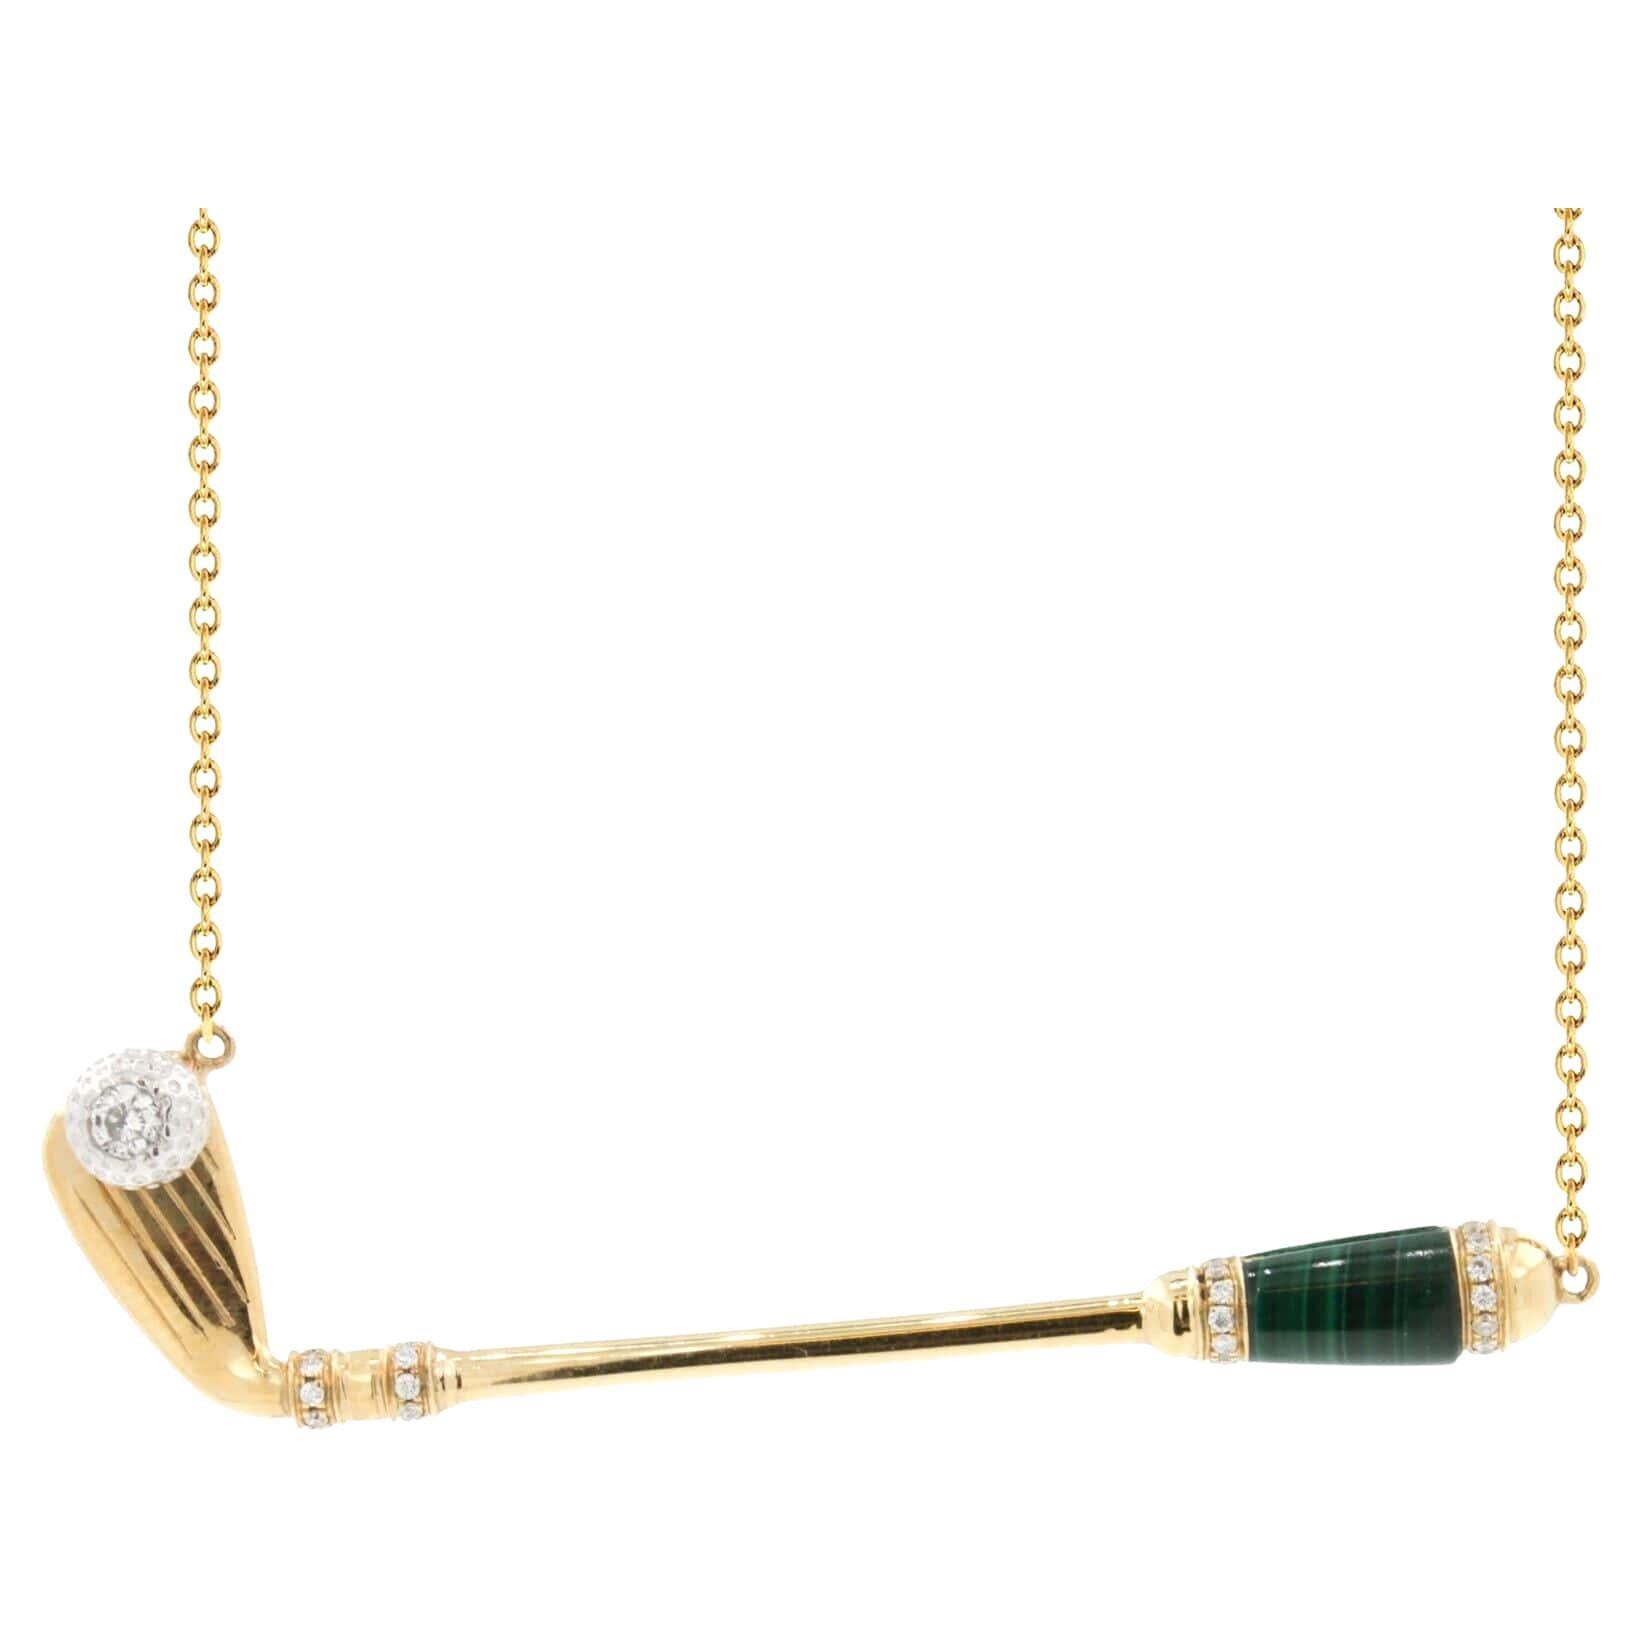 18K Yellow Gold
Green Malachite Gemstone Handle
White Diamond Golf Ball Gemstone
0.25 cts Diamonds
16-18 inches Diamond-Cut Link Cable chain length
In-Stock
This is part of Galt & Bro. Jewelry's exclusive, custom made-to-order Golf Club Birdies